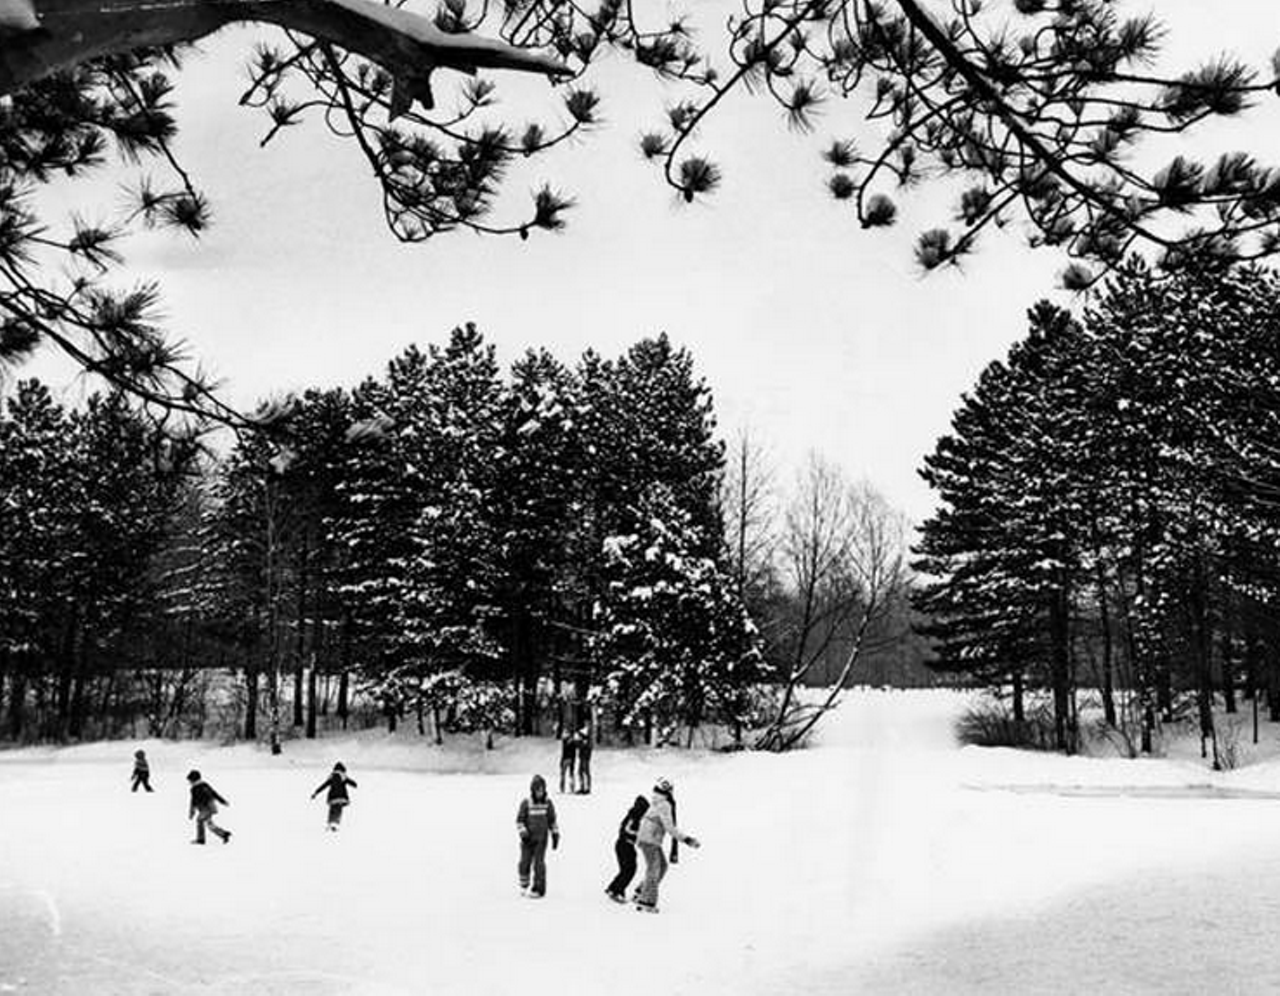 Ice skating on Strawberry Lane Pond in the North Chagrin Reservation of the Cleveland Metroparks, 1978.